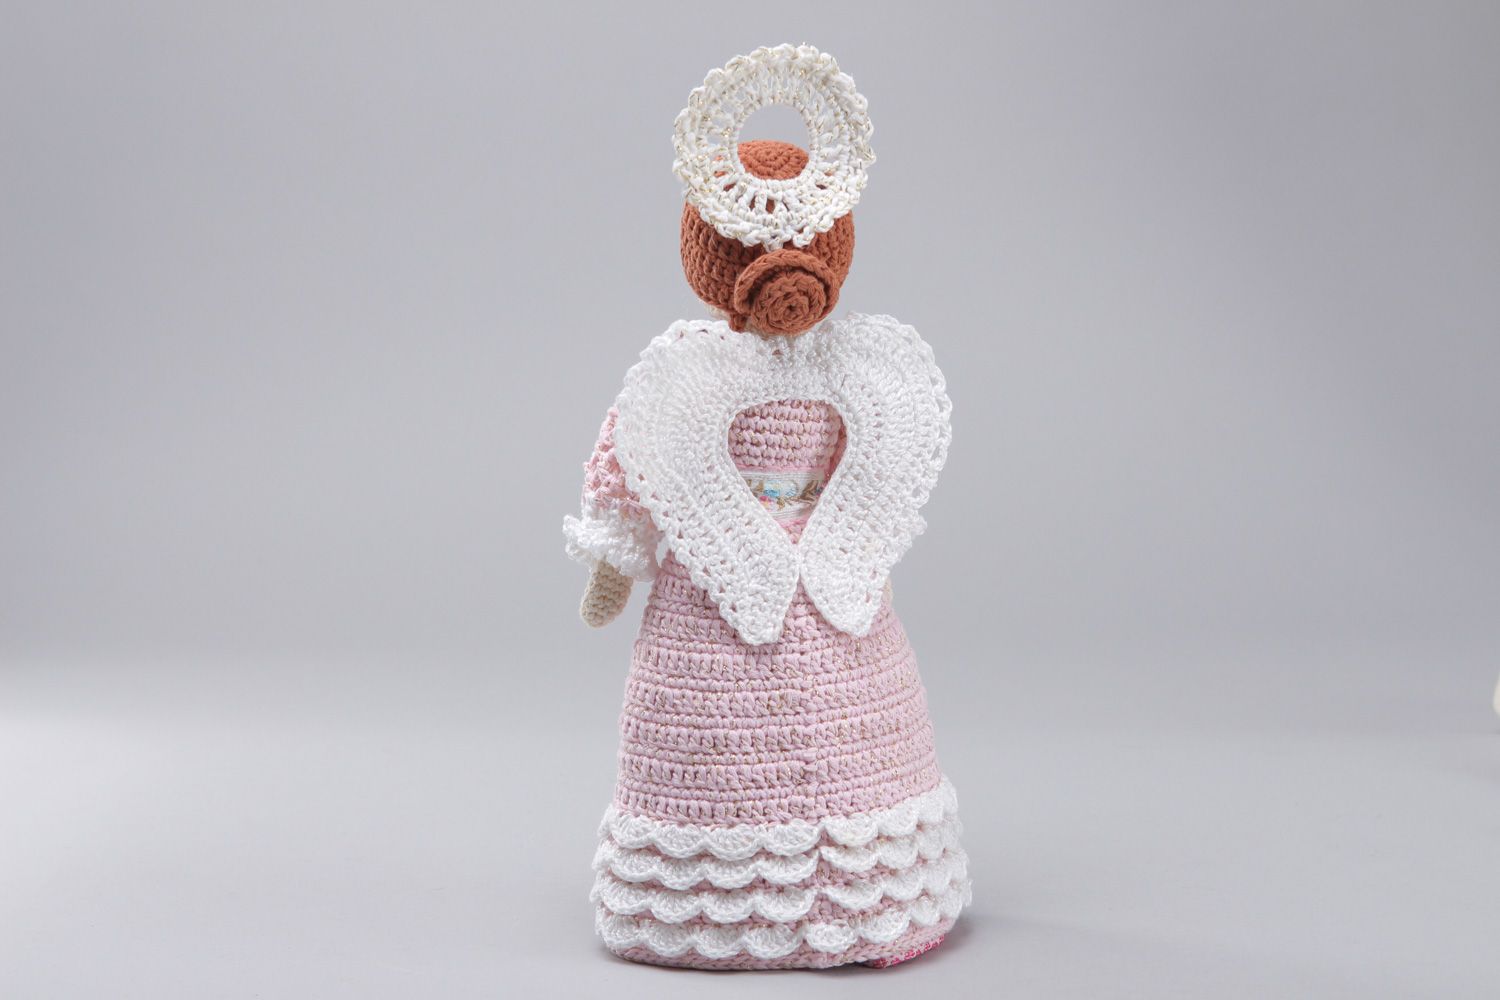 Handmade soft toy angel crocheted of cotton threads for kids and interior decor photo 3